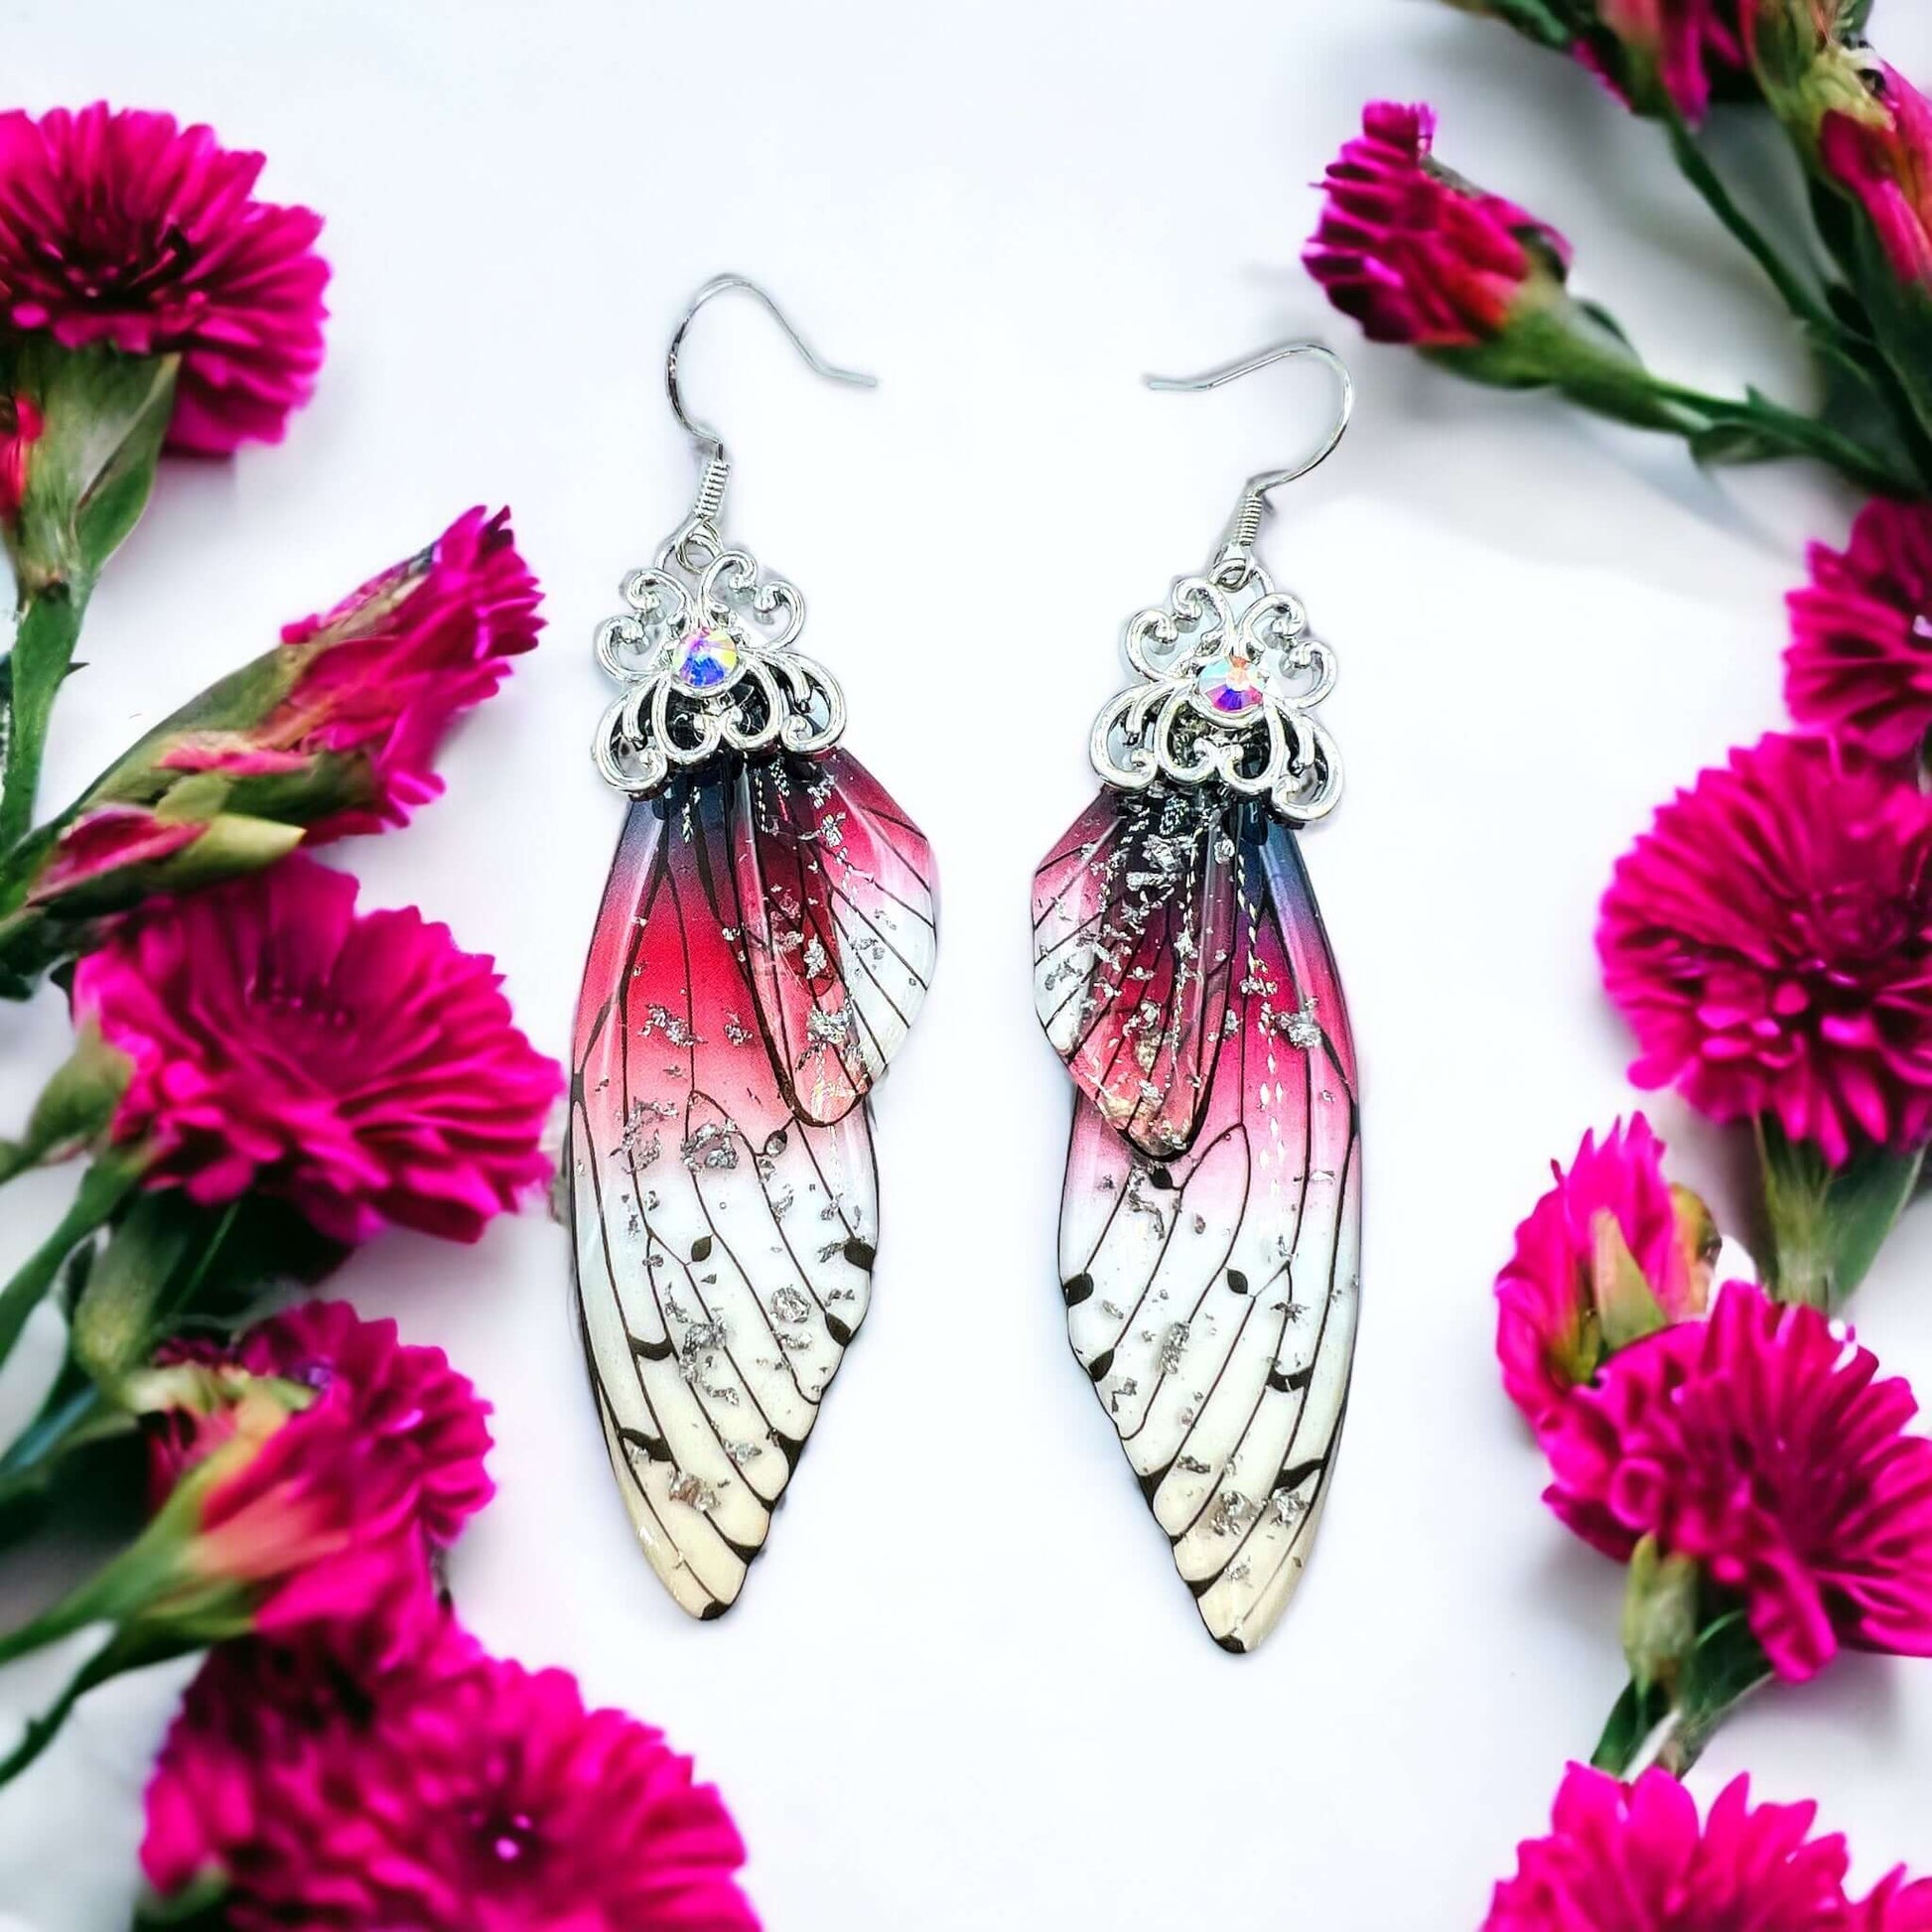 Fairy wing earrings with petals scattered on a white surface.